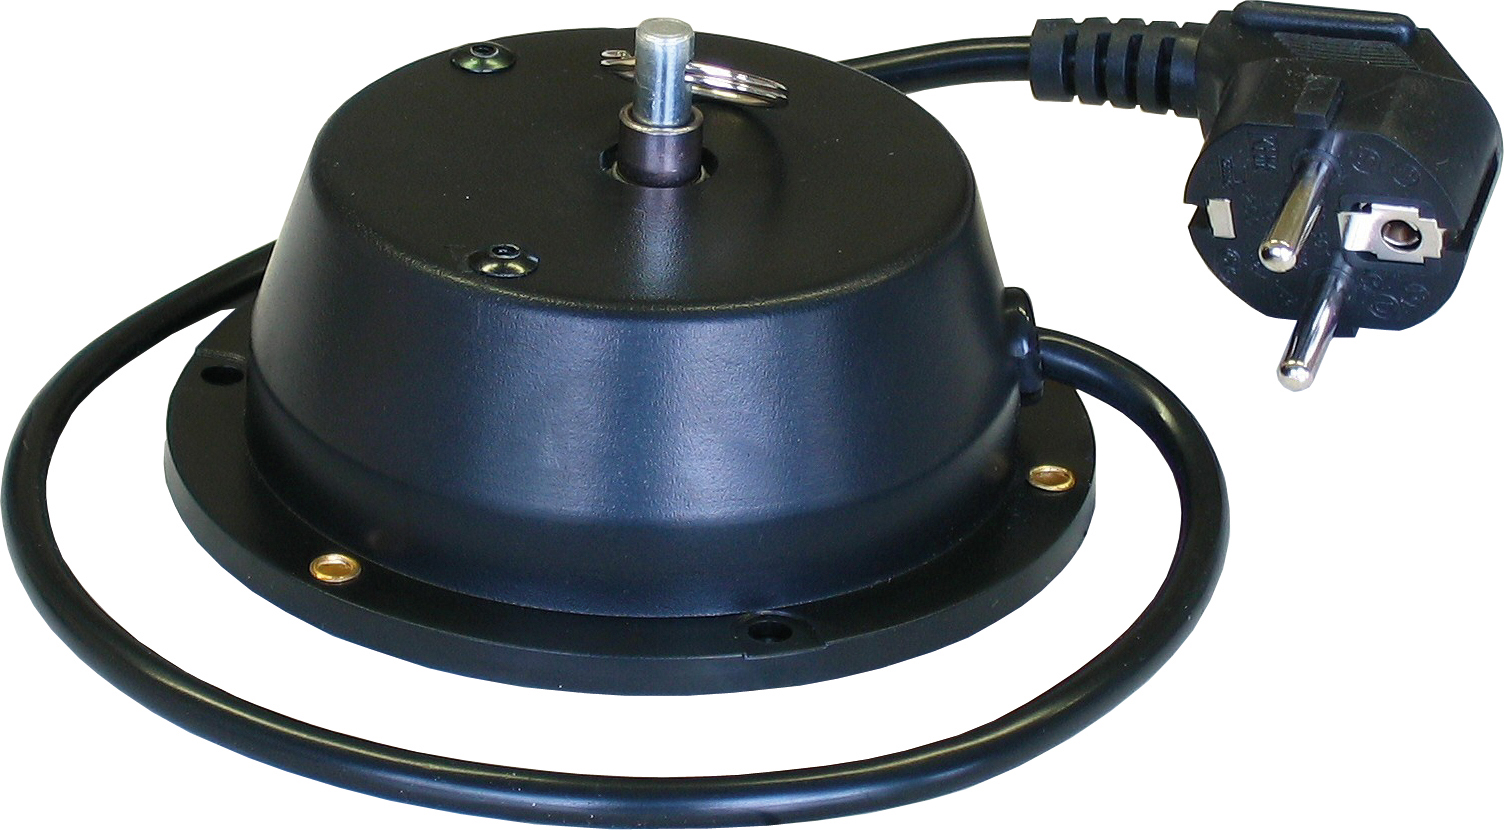 Motor for mirror ball: 1.5 rpm